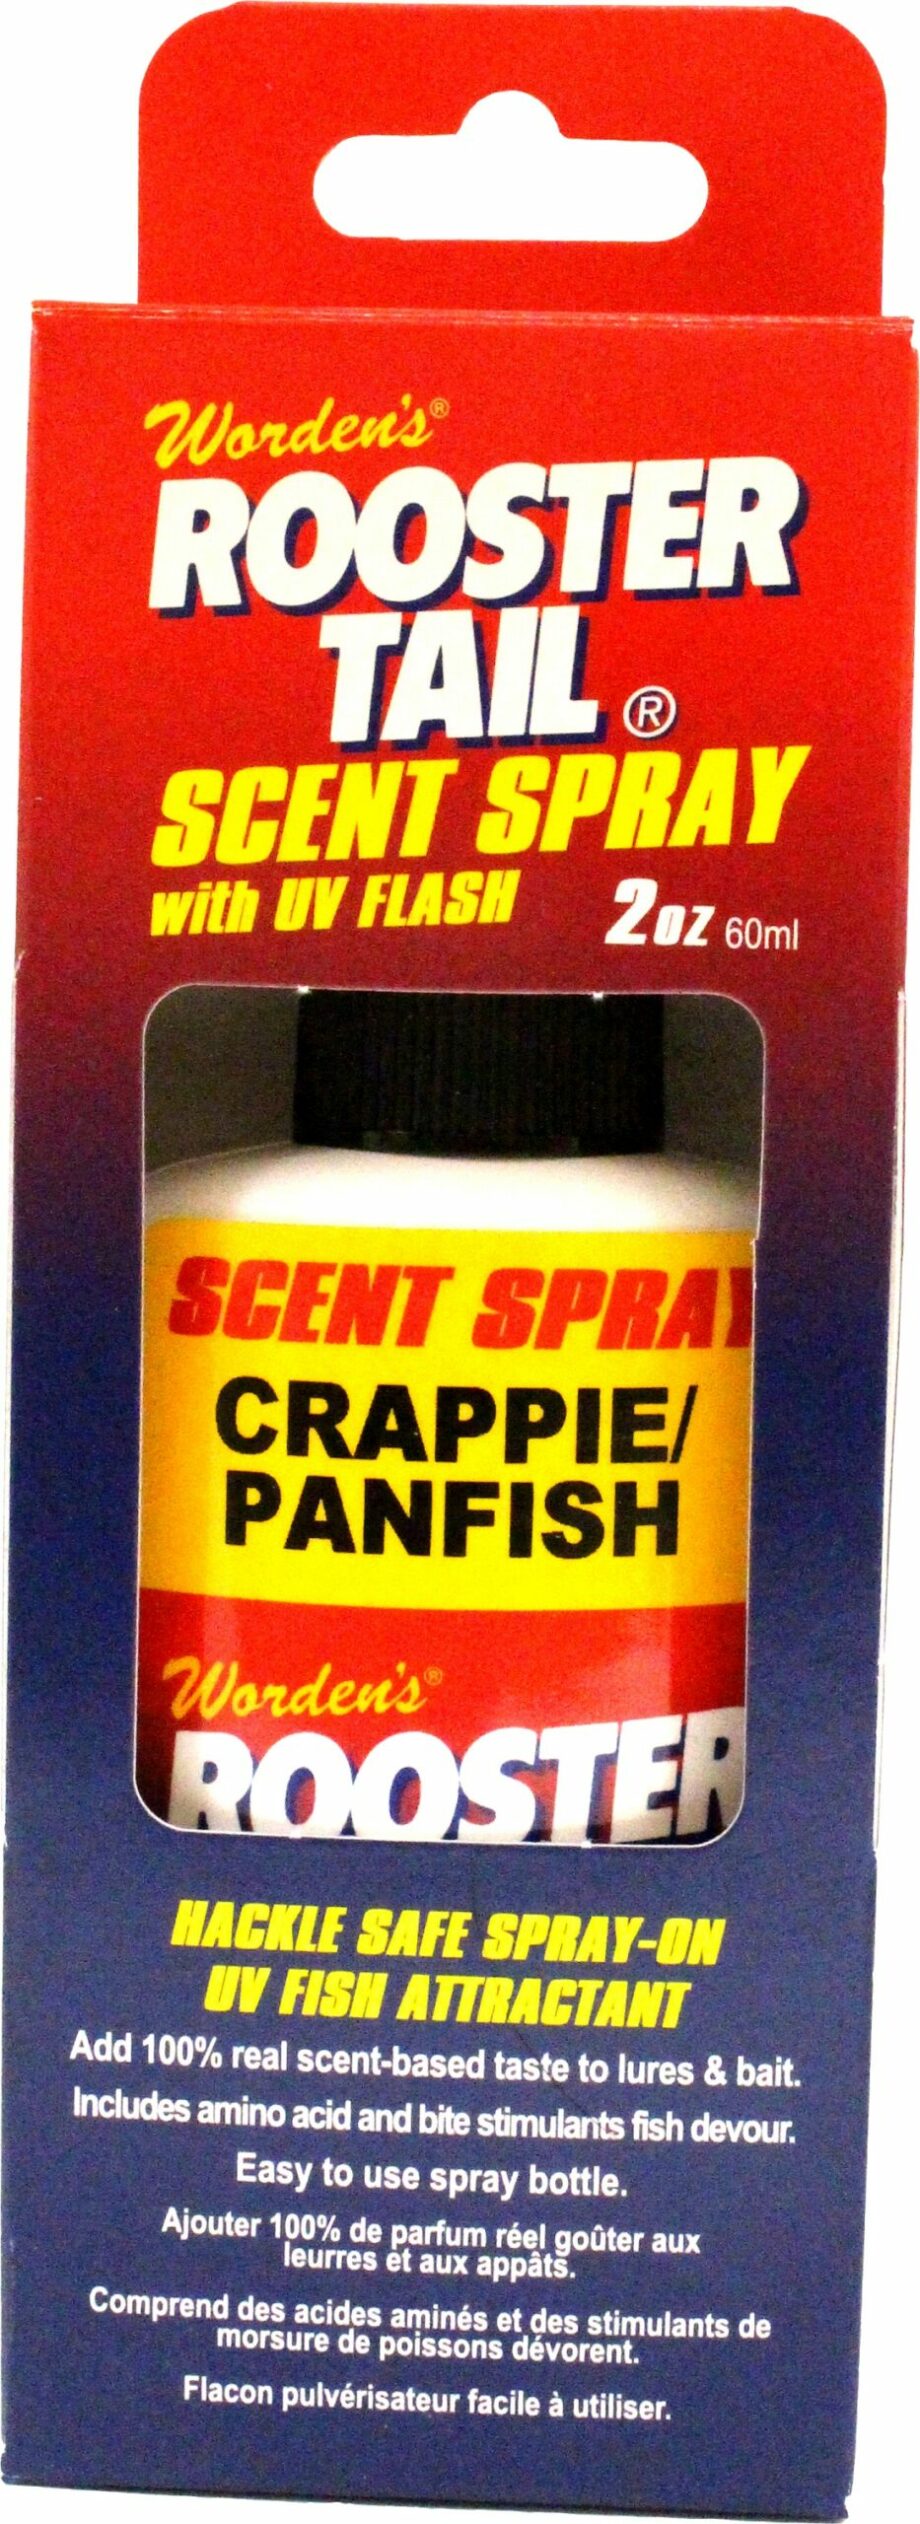 https://www.yakimabait.com/wp-content/uploads/2019/11/products-roosterTailScent-CrappiePanFish-CPM-copy-scaled-920x2524.jpg